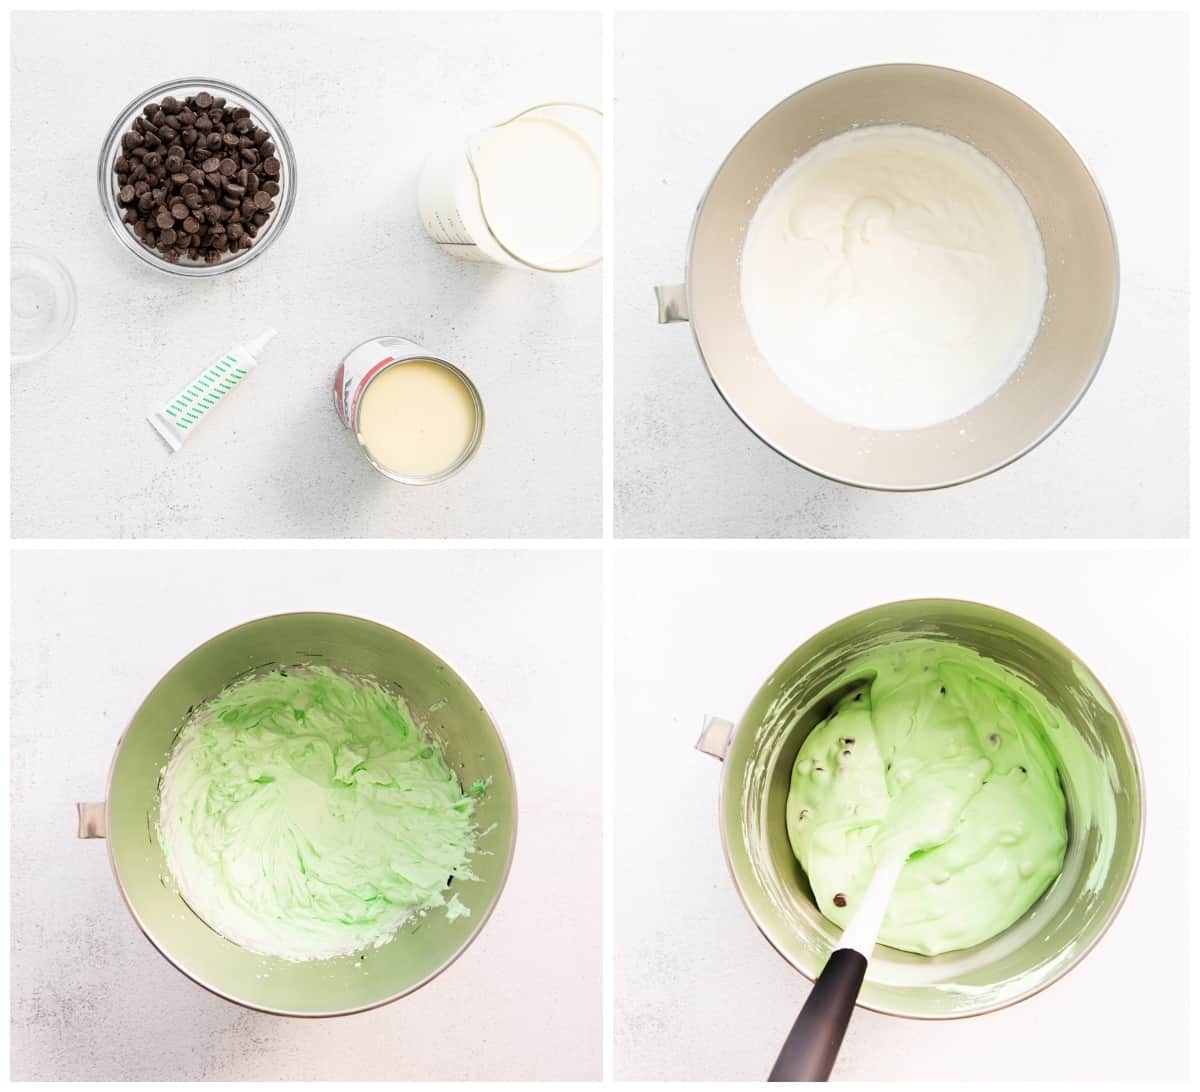 how to make mint chocolate chip ice cream step by step photo instructions